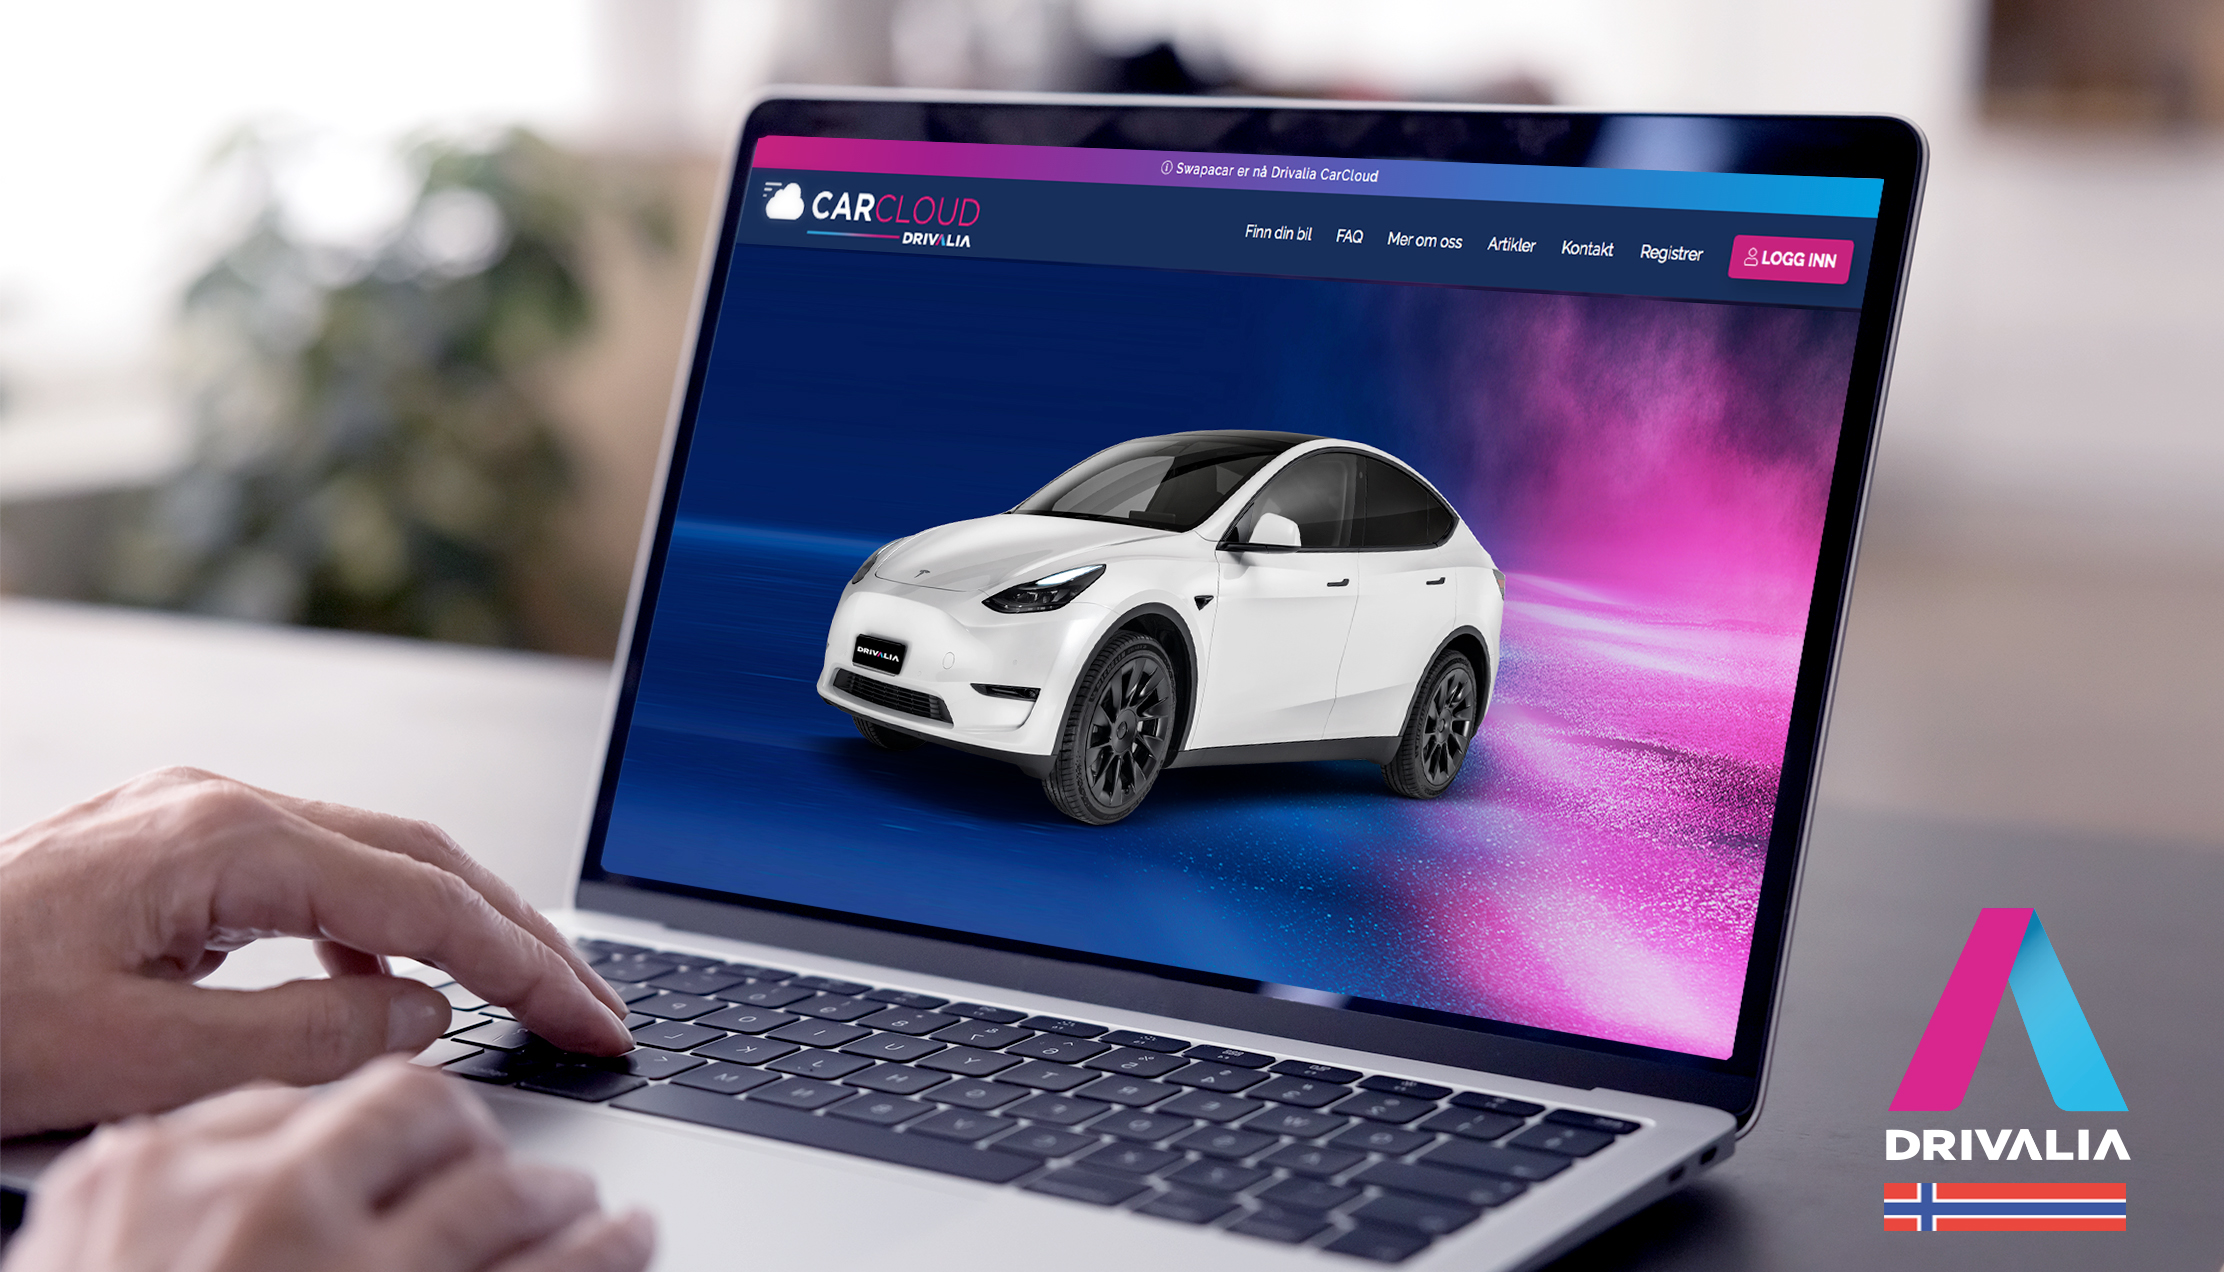 Drivalia on X: Following the expansion strategy begun in 2023, Drivalia  extended its presence around Europe. The latest development involves the  launch of the CarCloud car subscription service in Norway. This represents